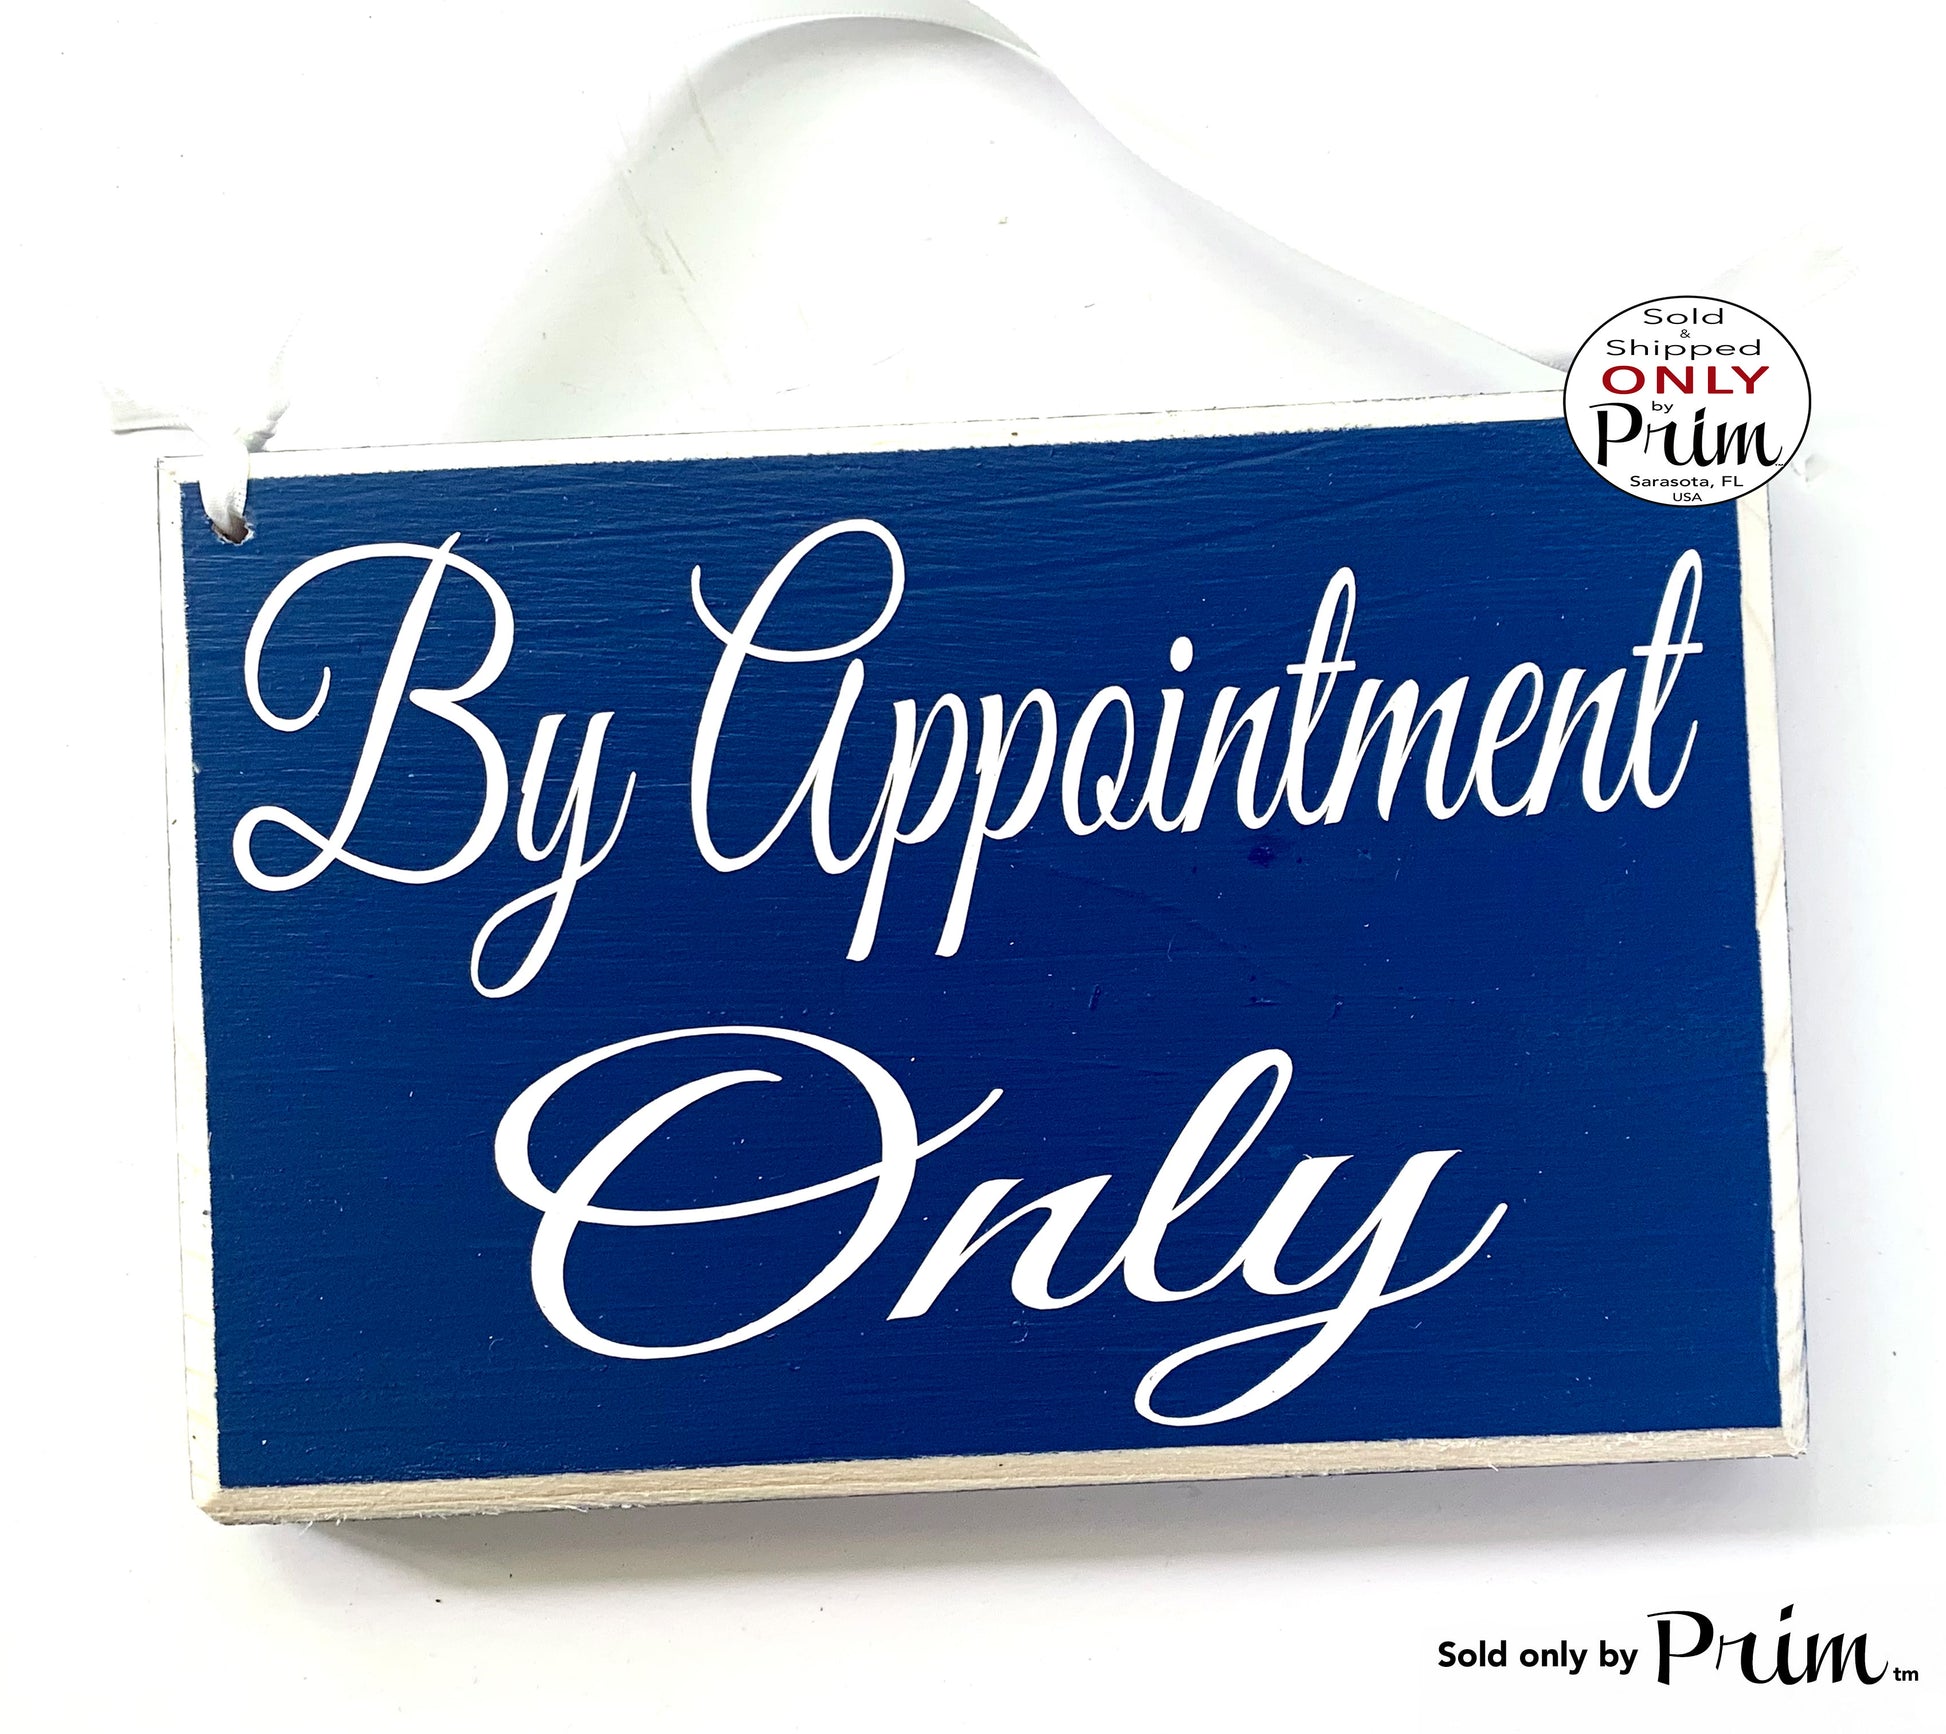 Designs by Prim 8x6 By Appointment Only Custom Wood Sign | No Walk-Ins Office Business Salon Spa Therapy Clinic Massage Facial Appointment Door Plaque